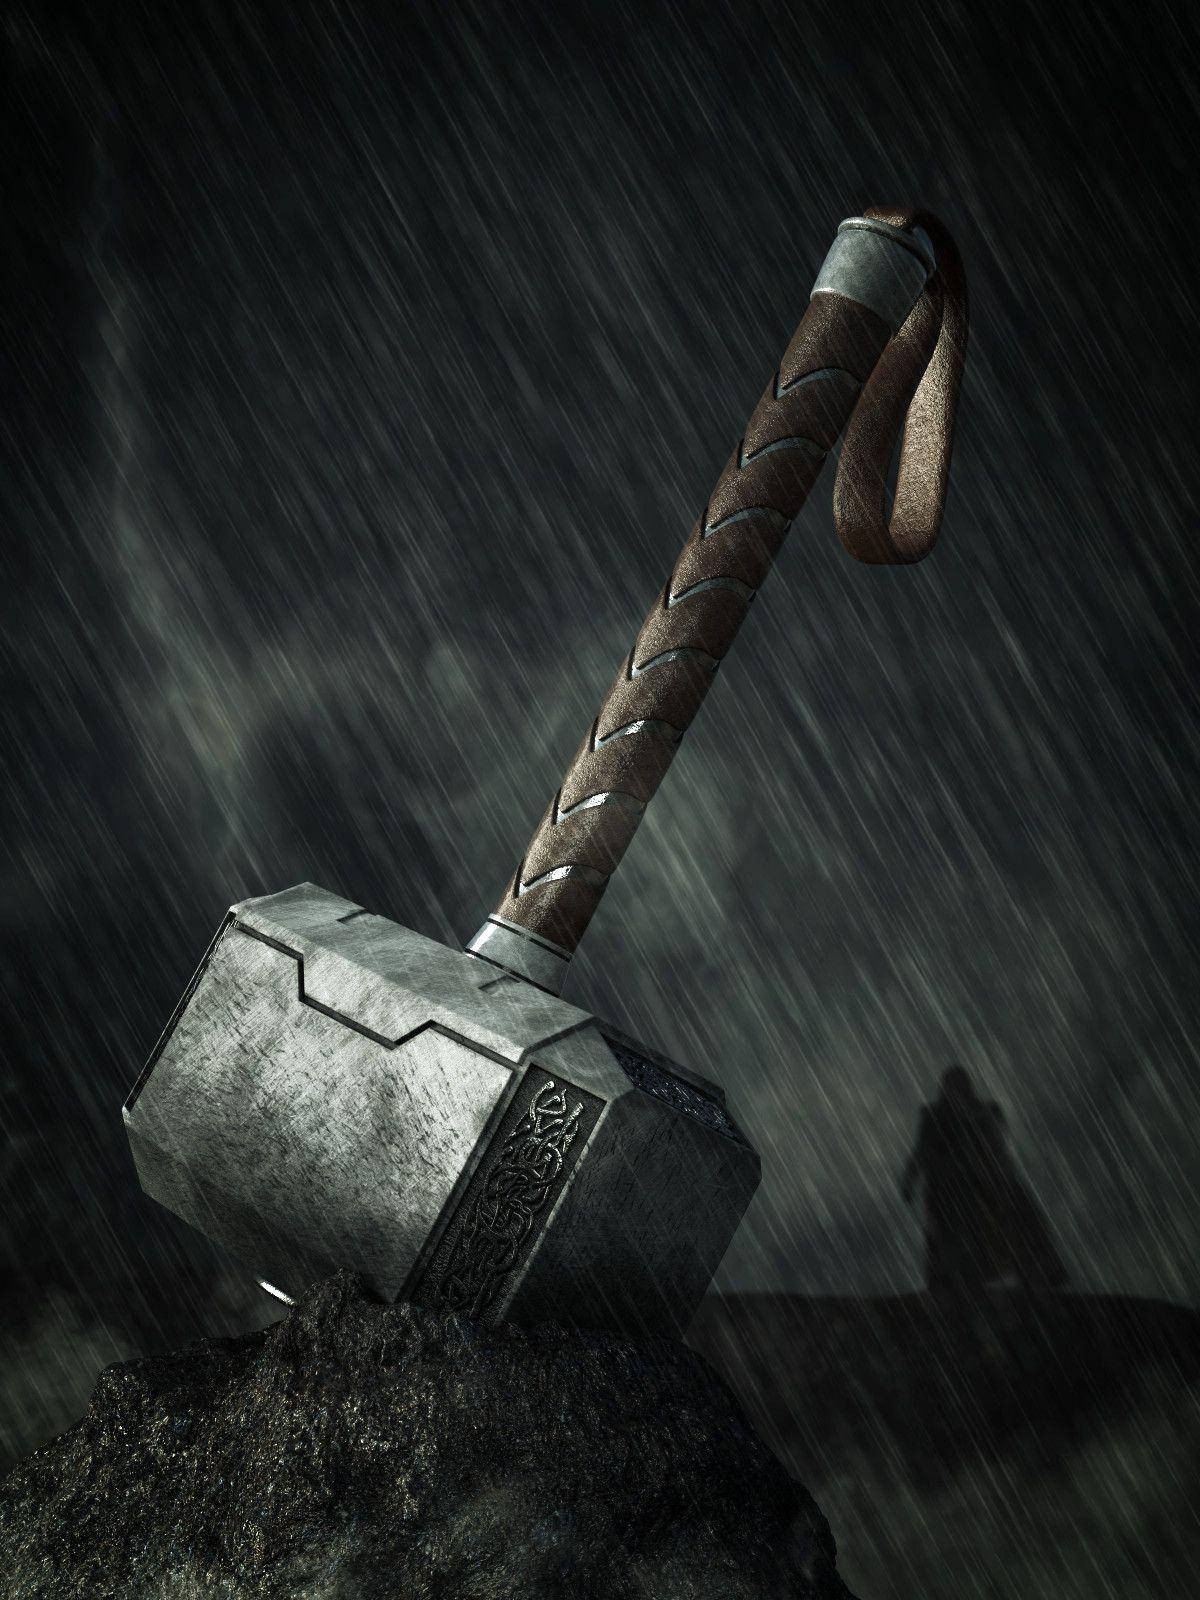 "Powerful Possibilities of Thor's Hammer" Wallpaper